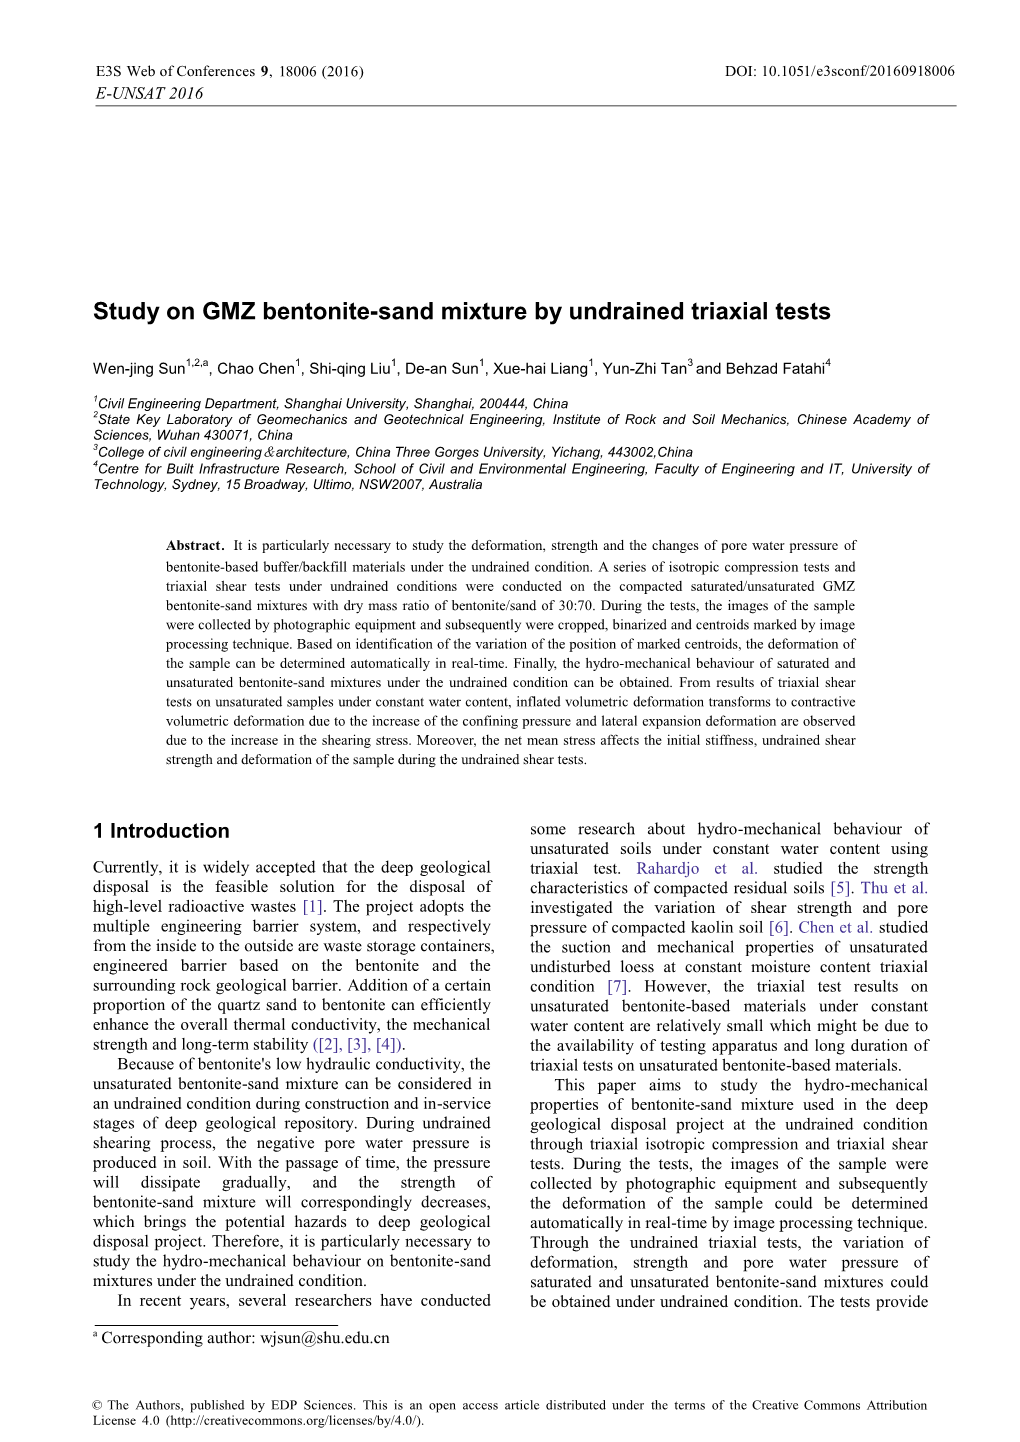 Study on GMZ Bentonite-Sand Mixture by Undrained Triaxial Tests